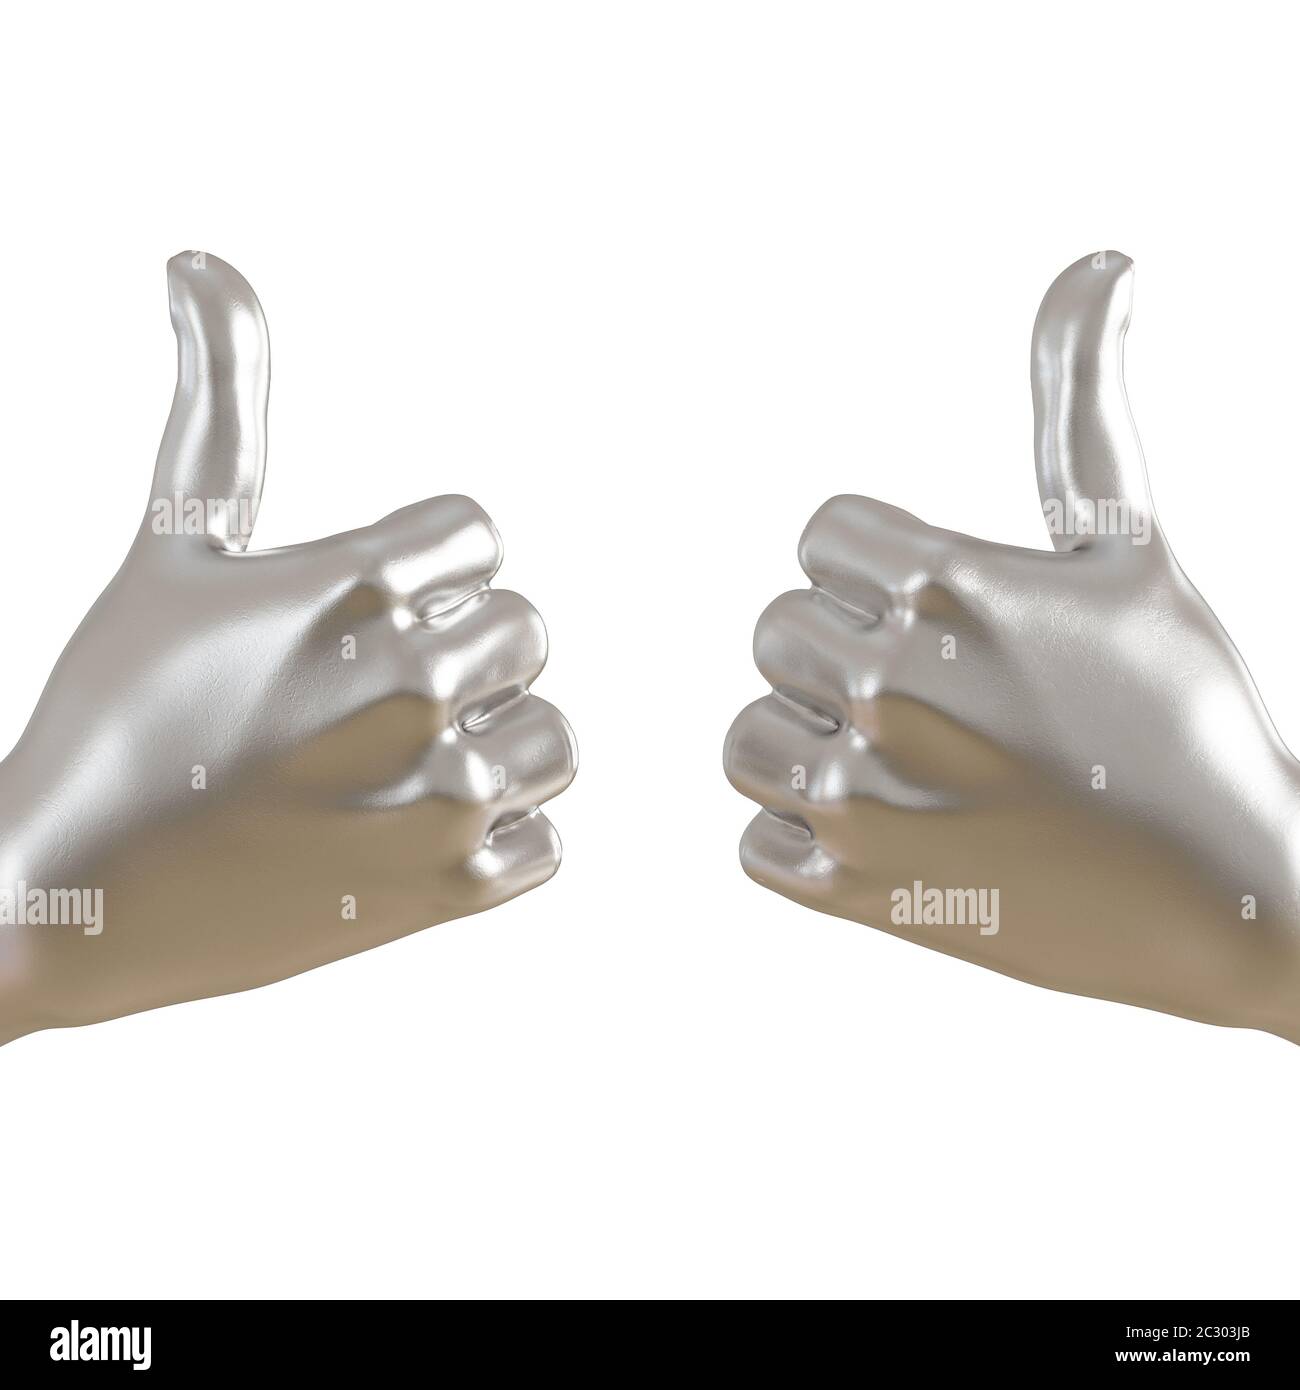 Metal figurine of a hand with a protruding thumb up on an isolated background. 3d rendering Stock Photo